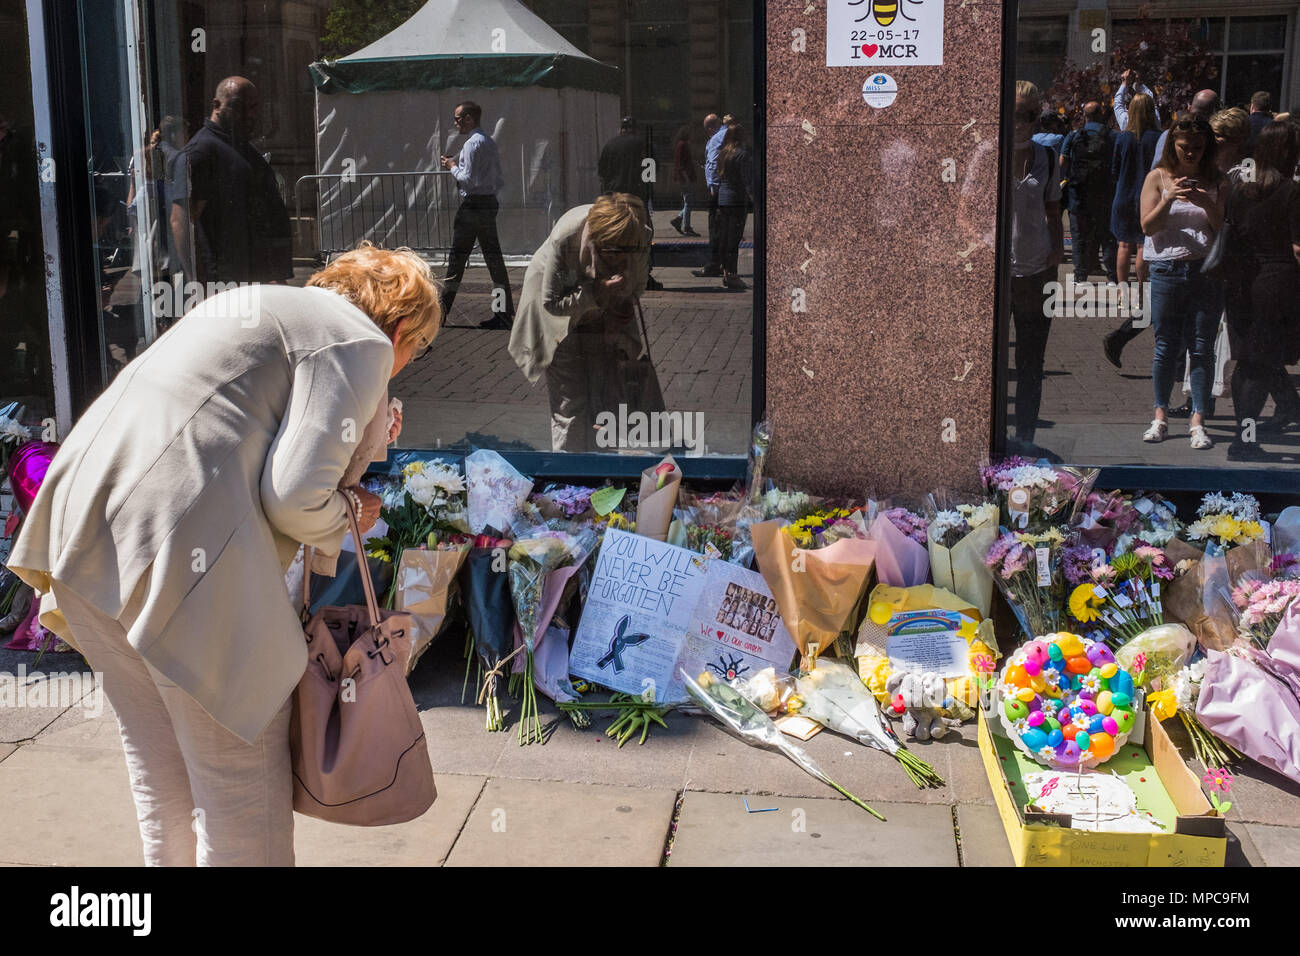 St Anne's Square, Manchester, UK. 22nd May, 2018. A woman reads messages in St. Anne's Square, Manchester remembering the victims of the Manchester Arena bombing on it's 1st anniversary. Credit: Ian Walker/Alamy Live News Stock Photo